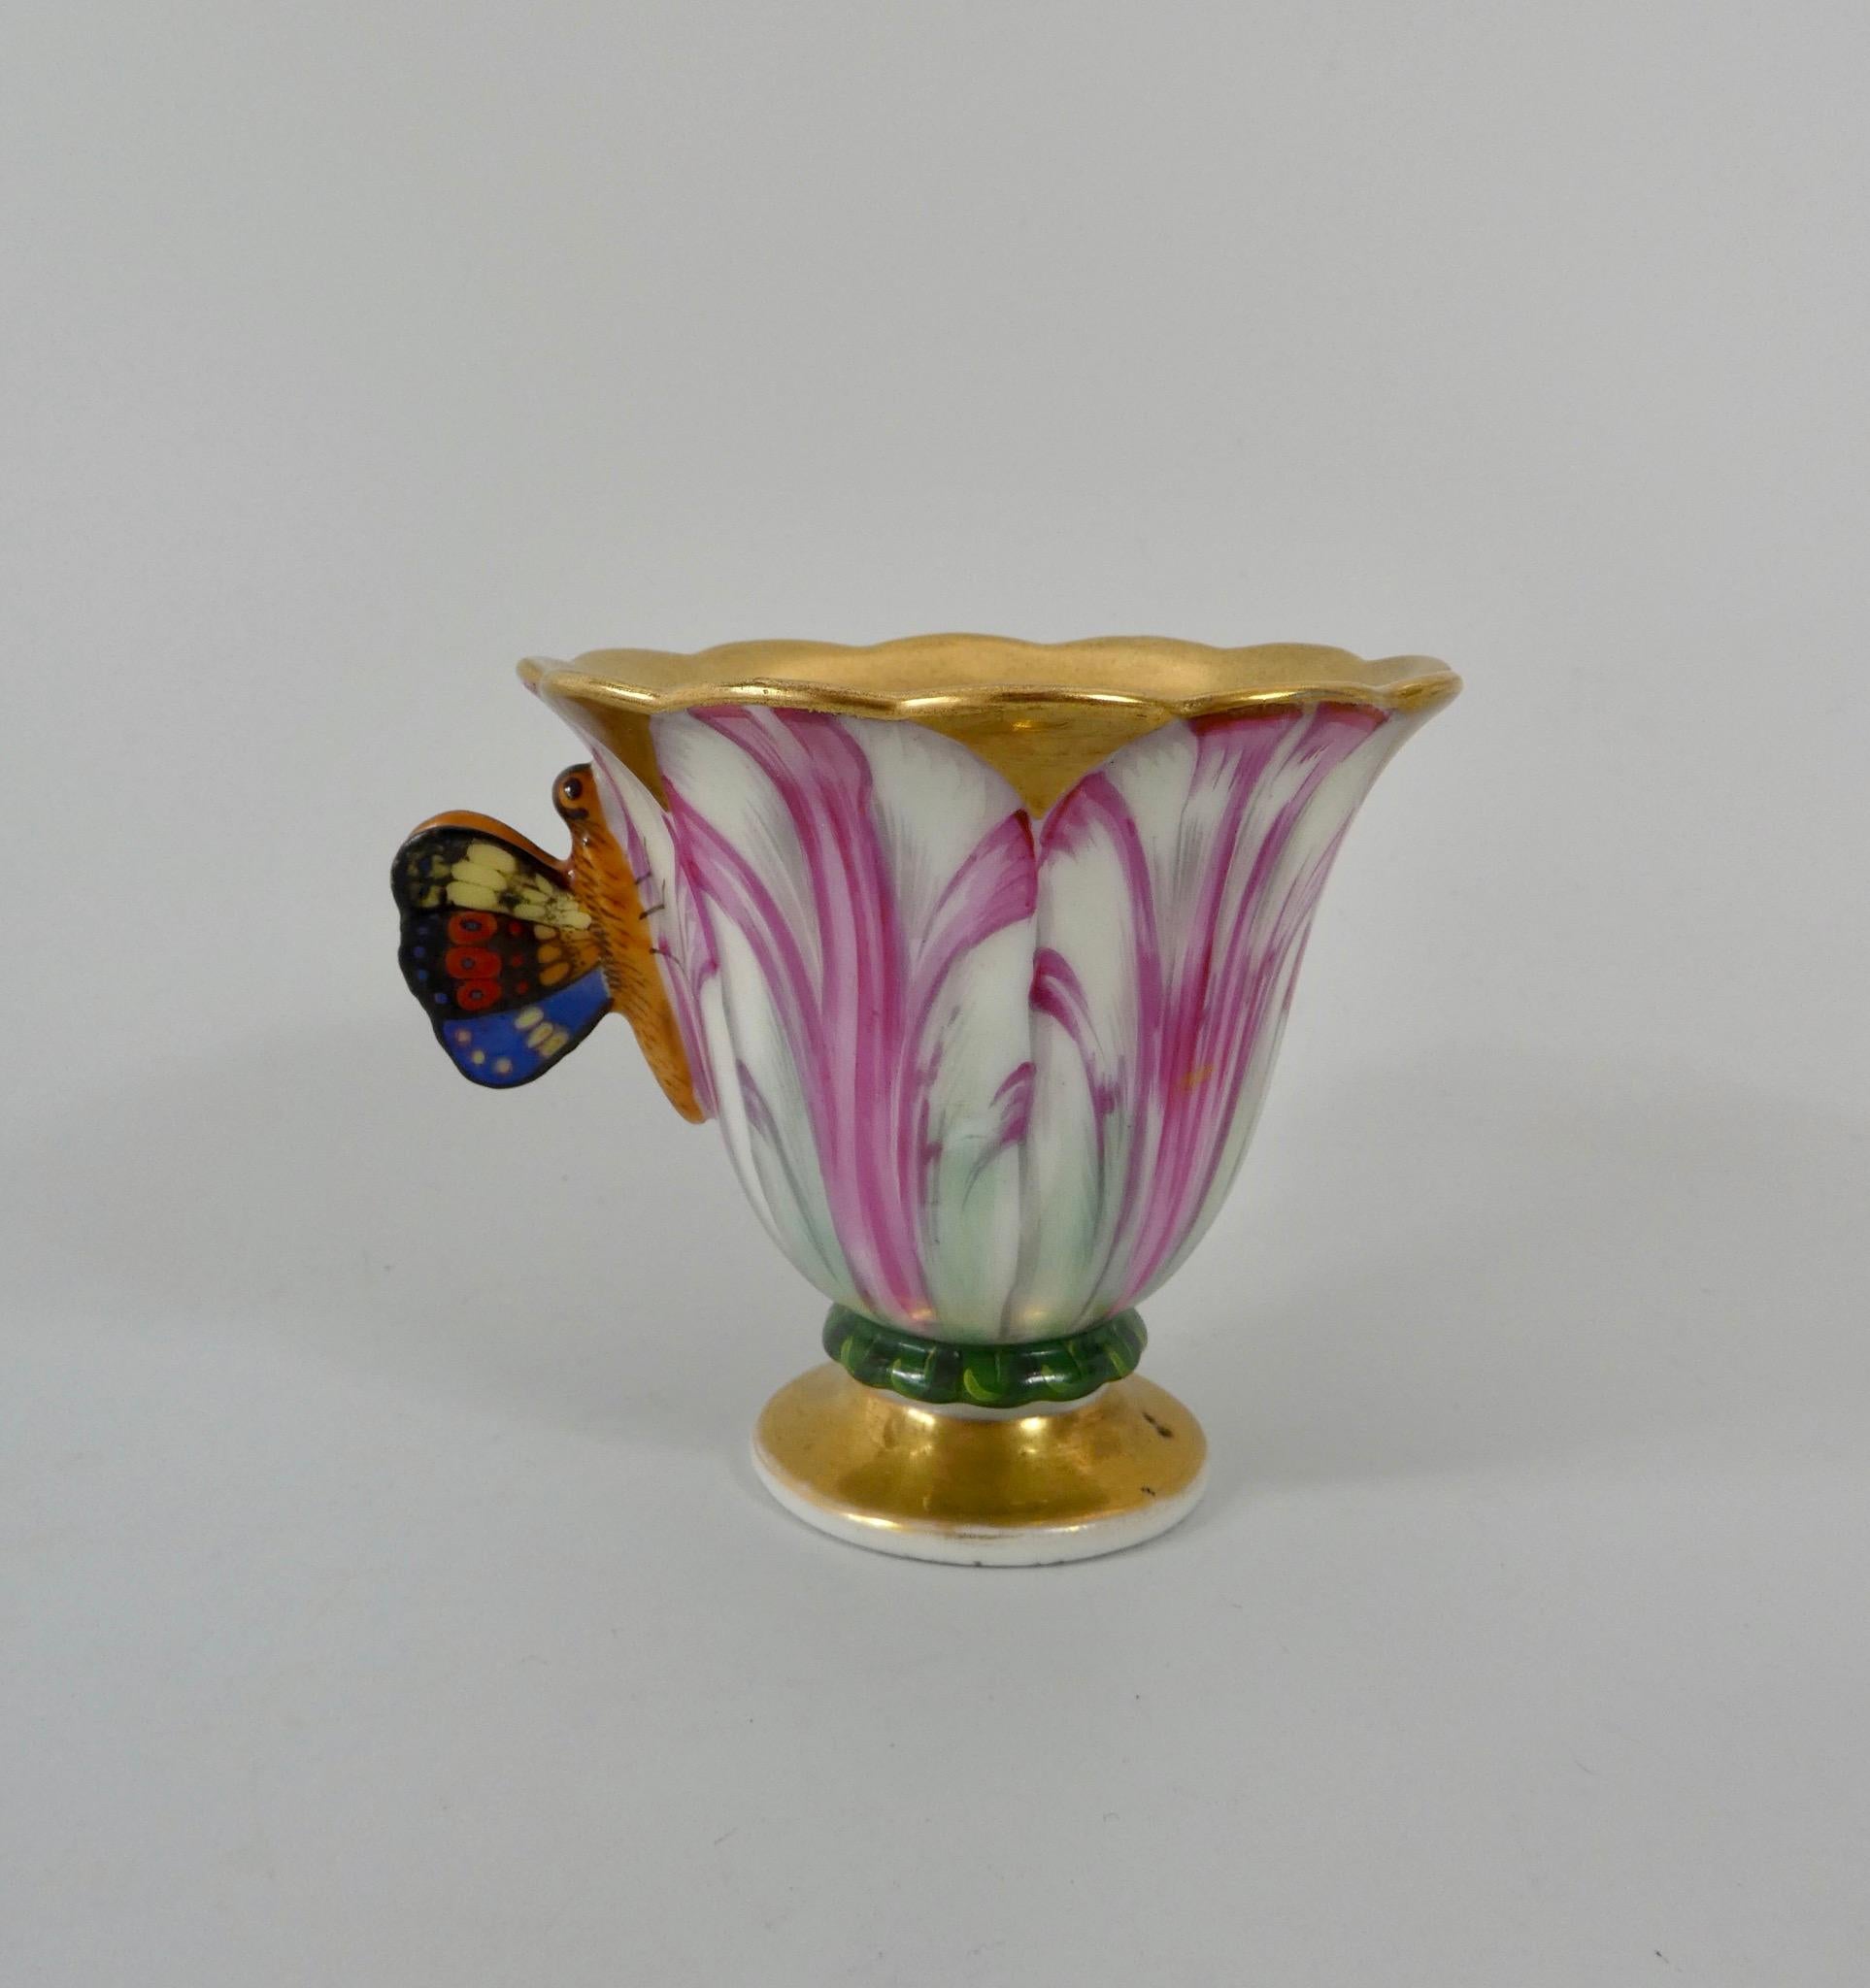 Fired Spode Porcelain Tulip Cup and Saucer, circa 1820